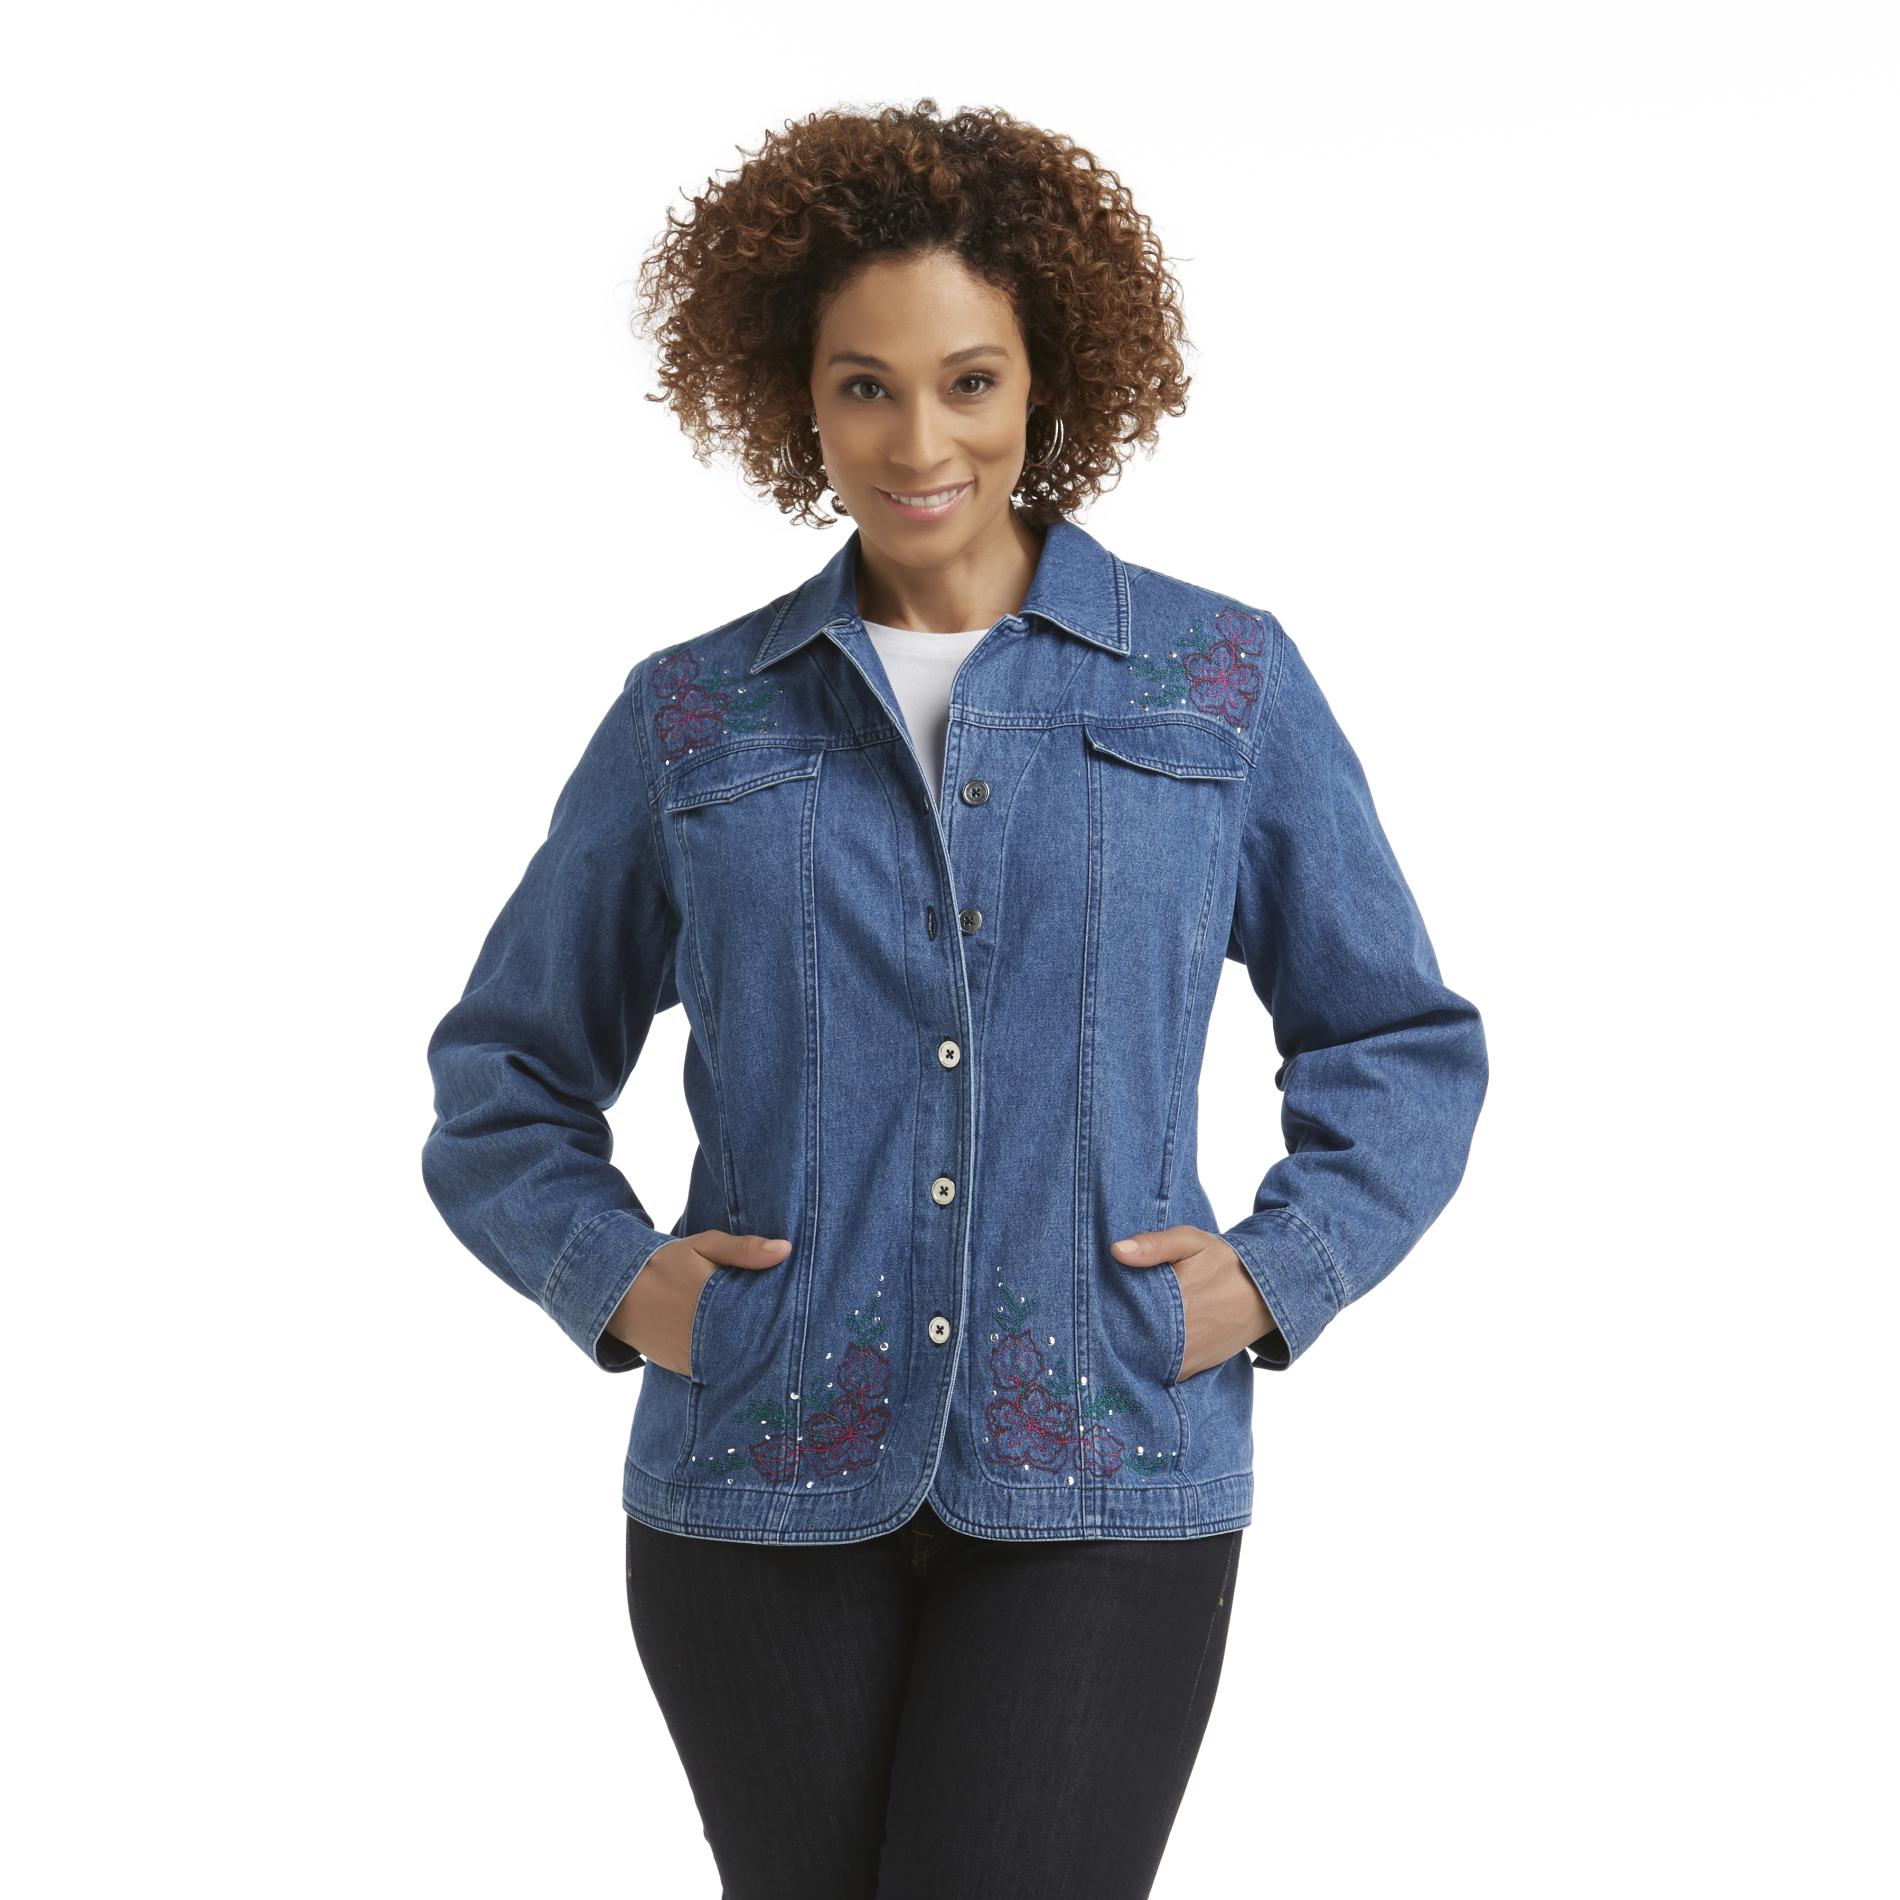 Basic Editions Women's Plus Denim Jacket - Embroidered